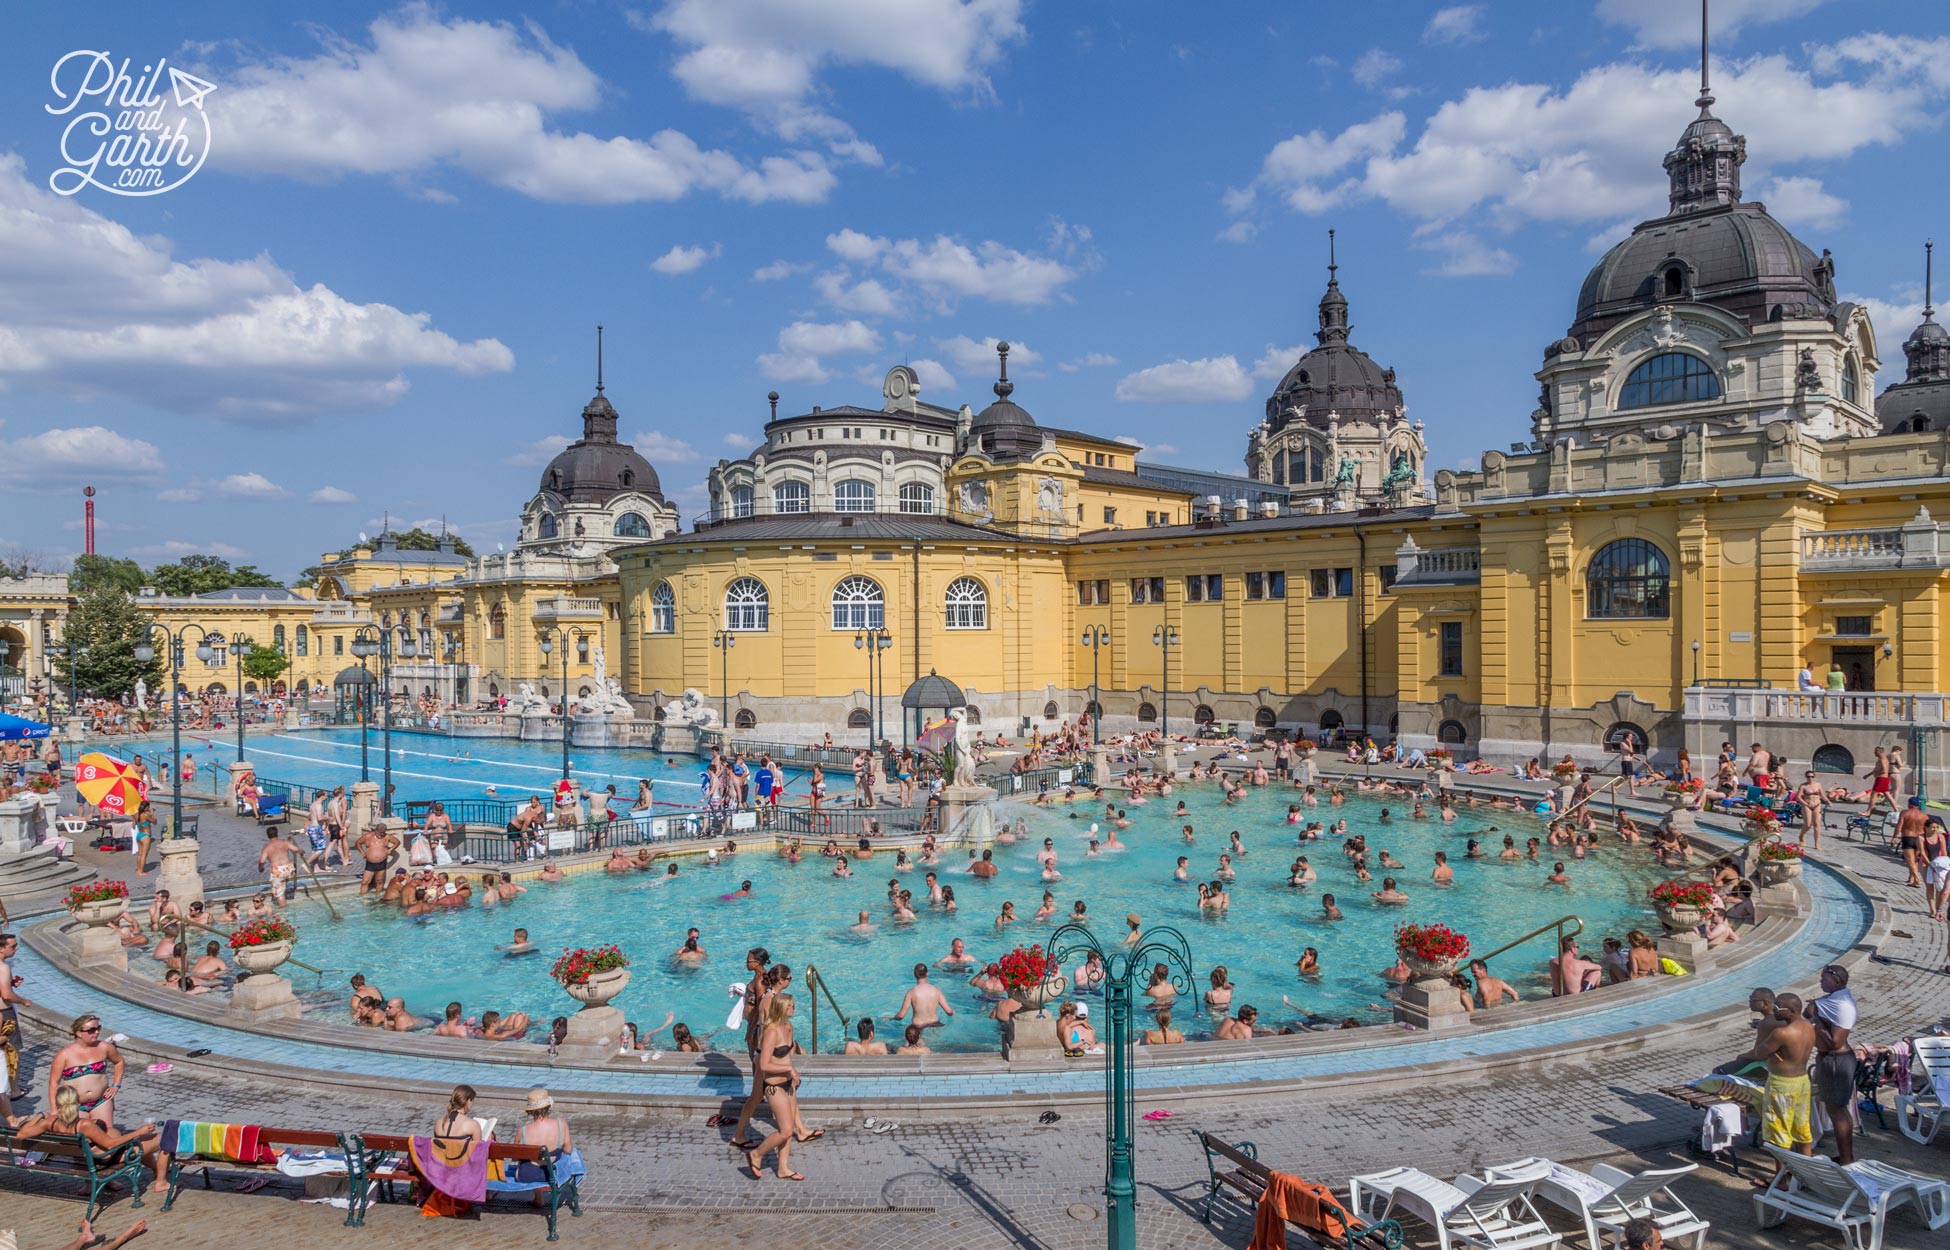 One of the three outdoor pools of the Széchenyi Thermal Bath